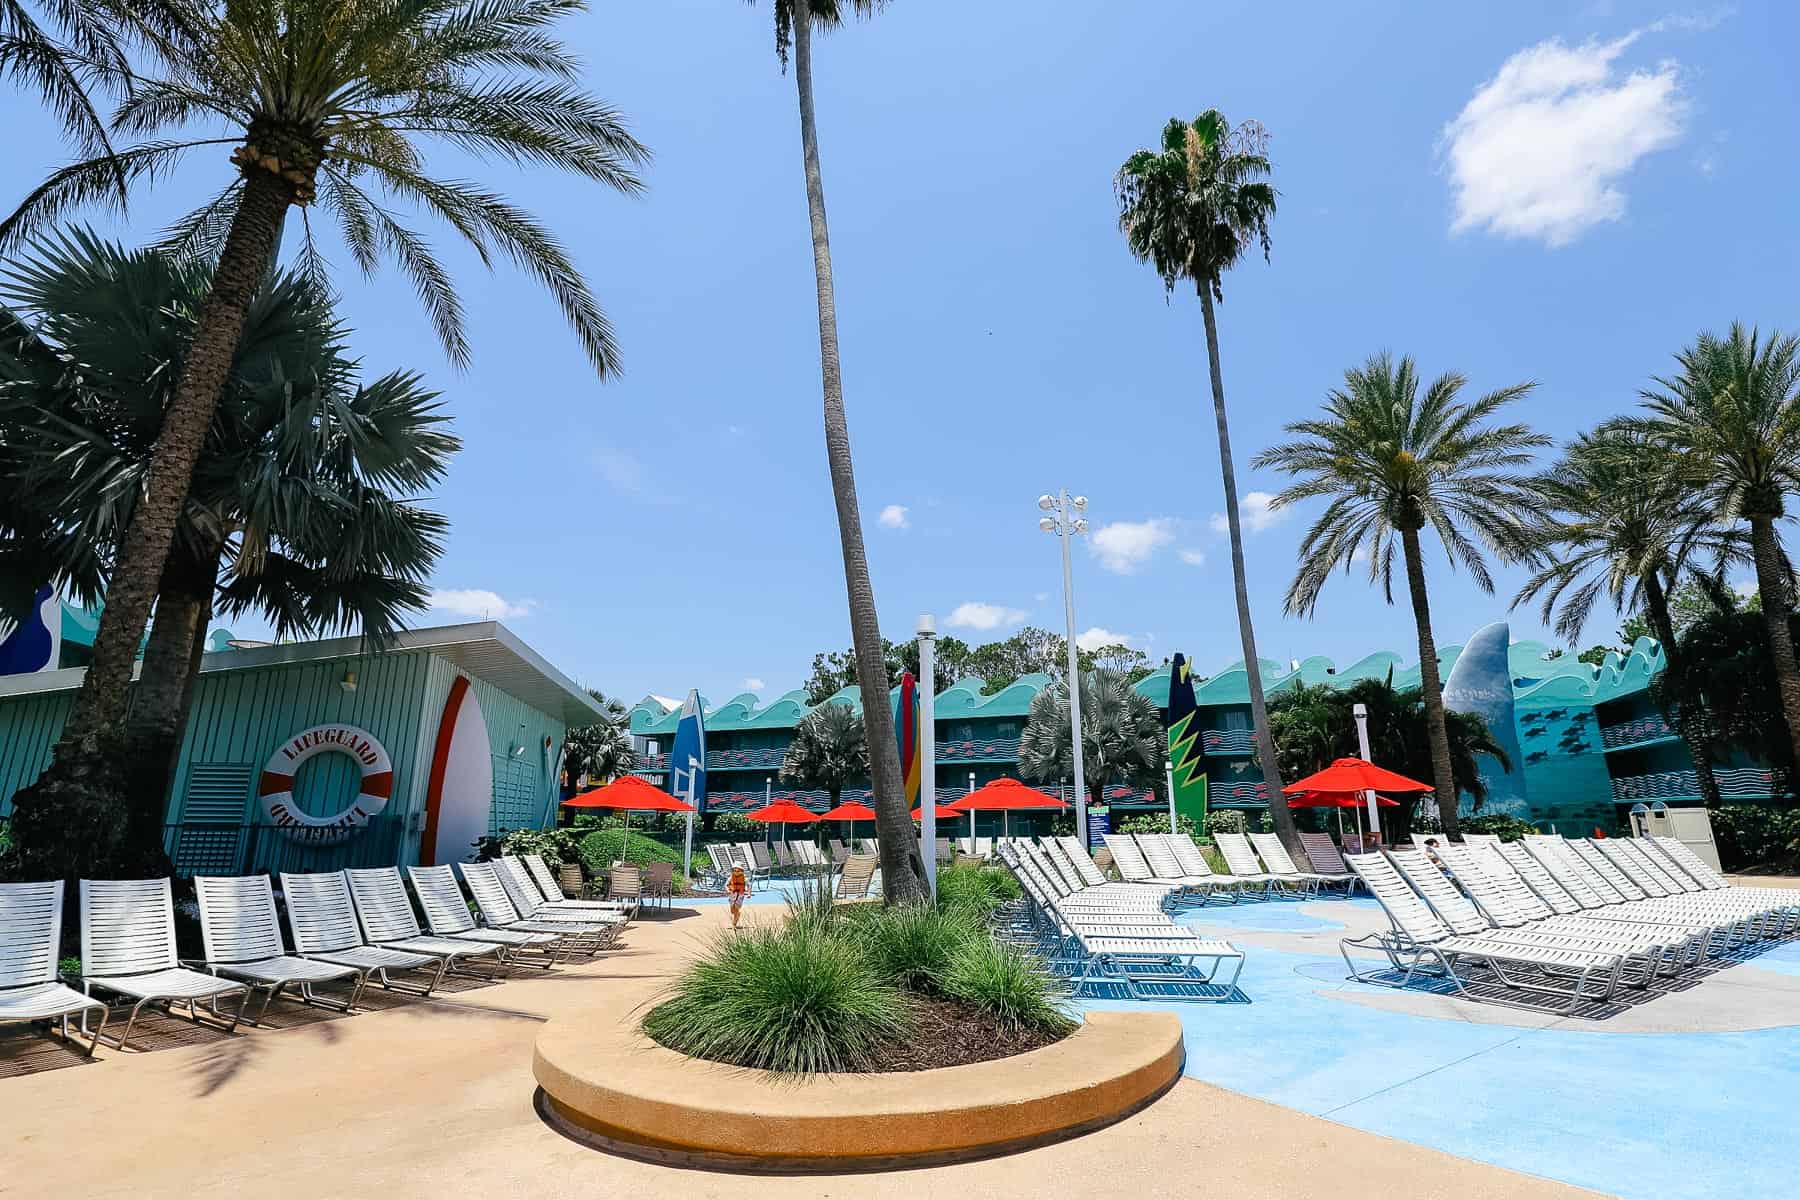 Lounge chairs surrounding the All-Star Sports Surfboard Bay Pool 